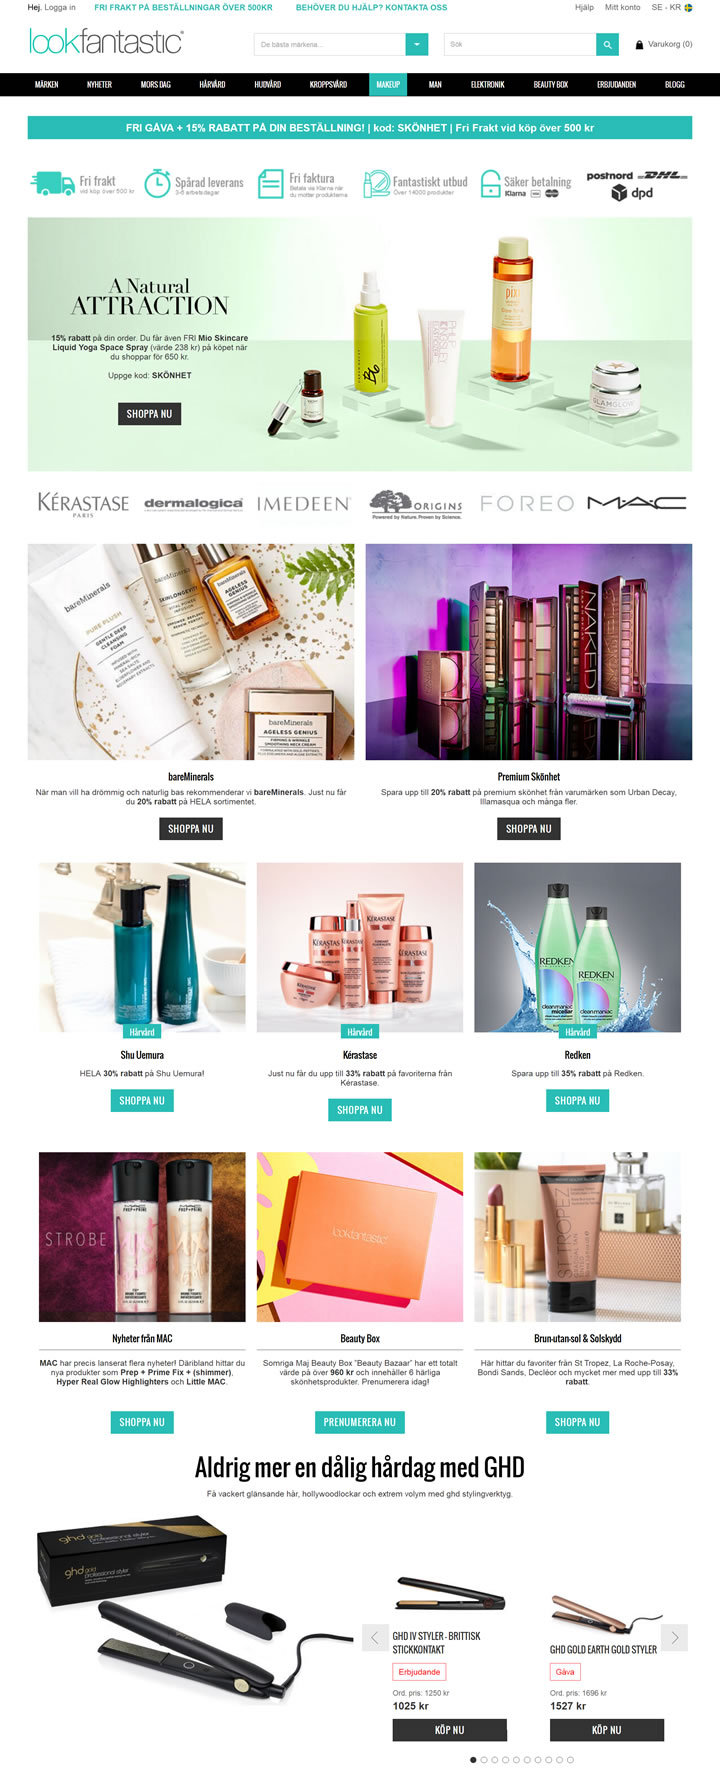 Lookfantastic Sweden: UK Famous Beauty Shopping Site